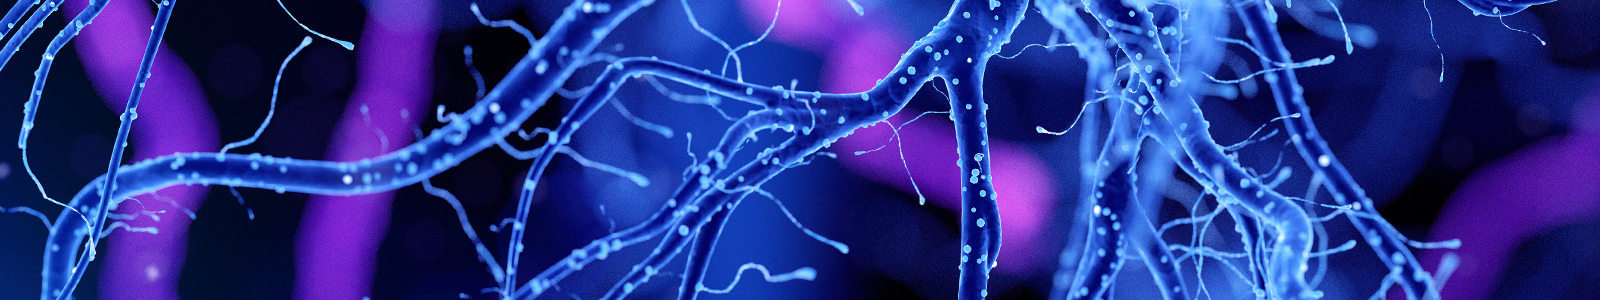 Glowing blue neuron dendrites extend out into space